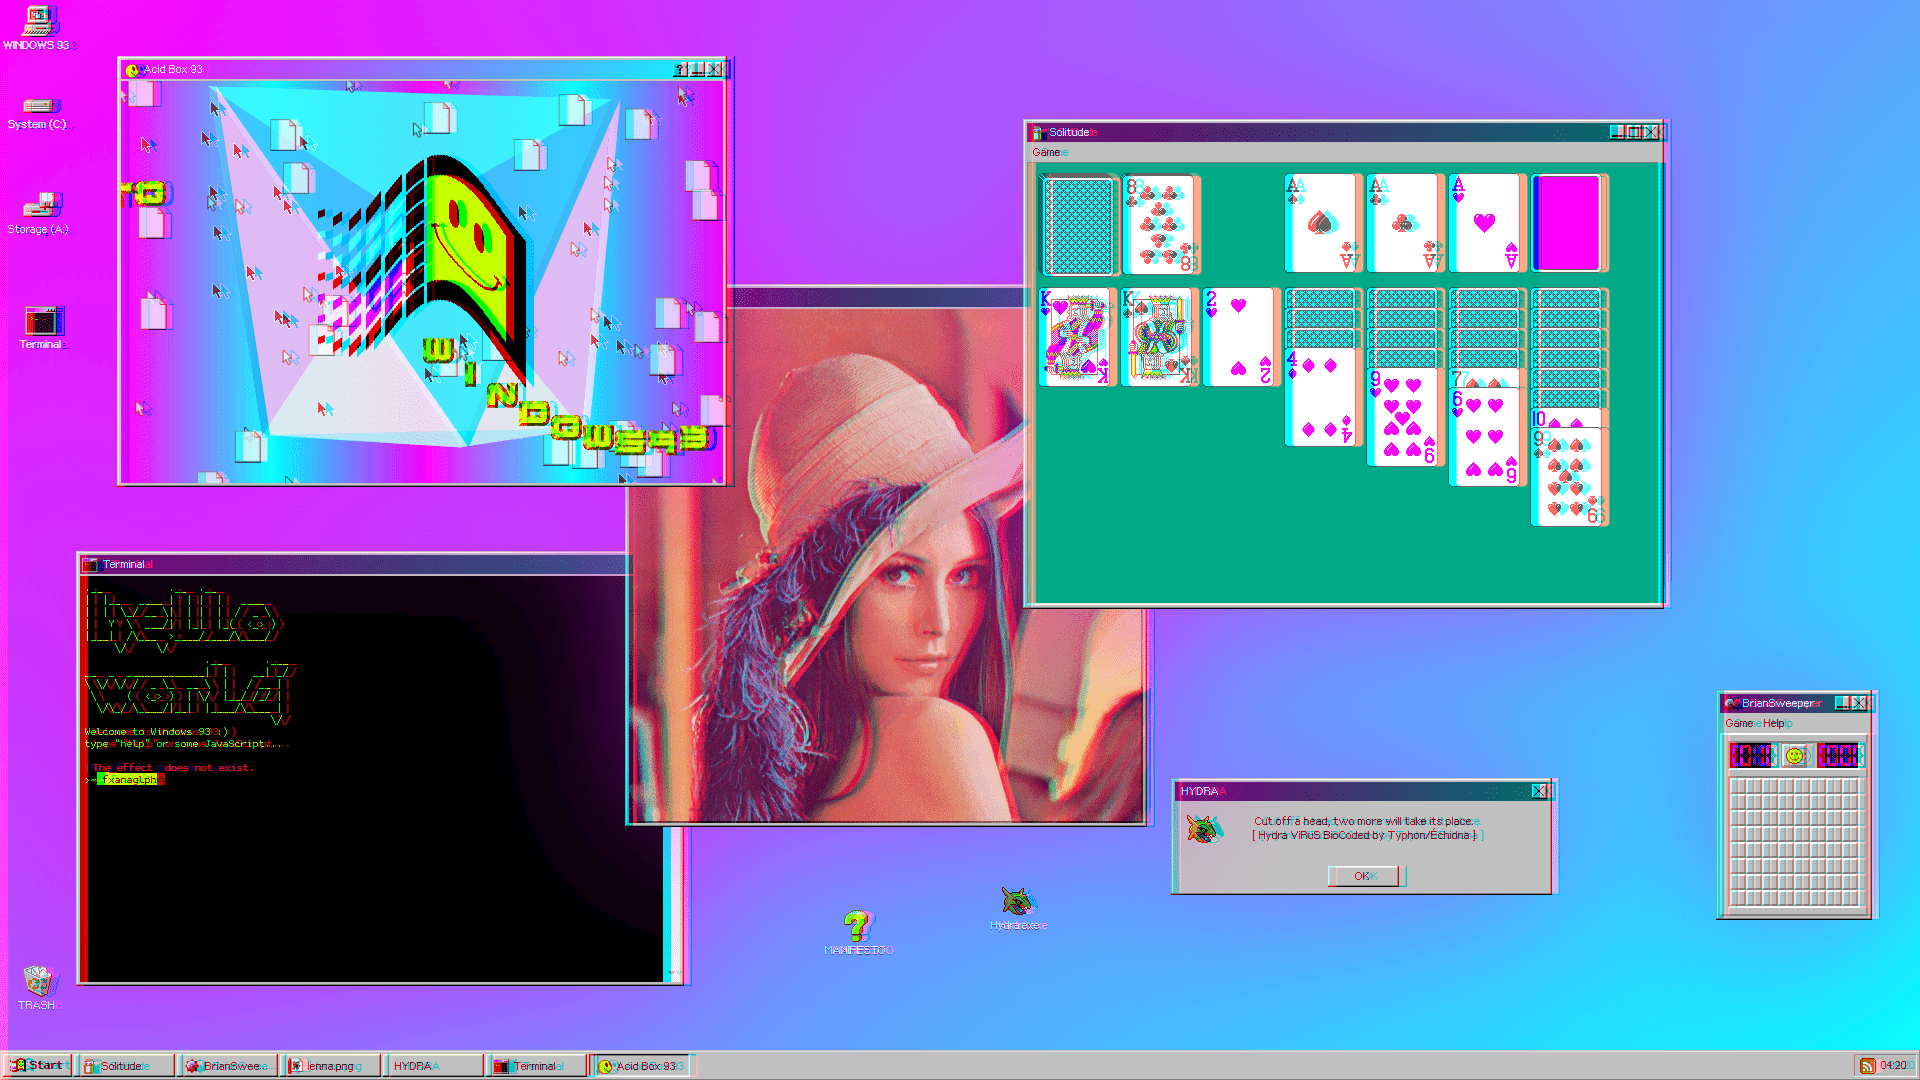 A computer screen with several different games on it - Windows 95, Windows 98